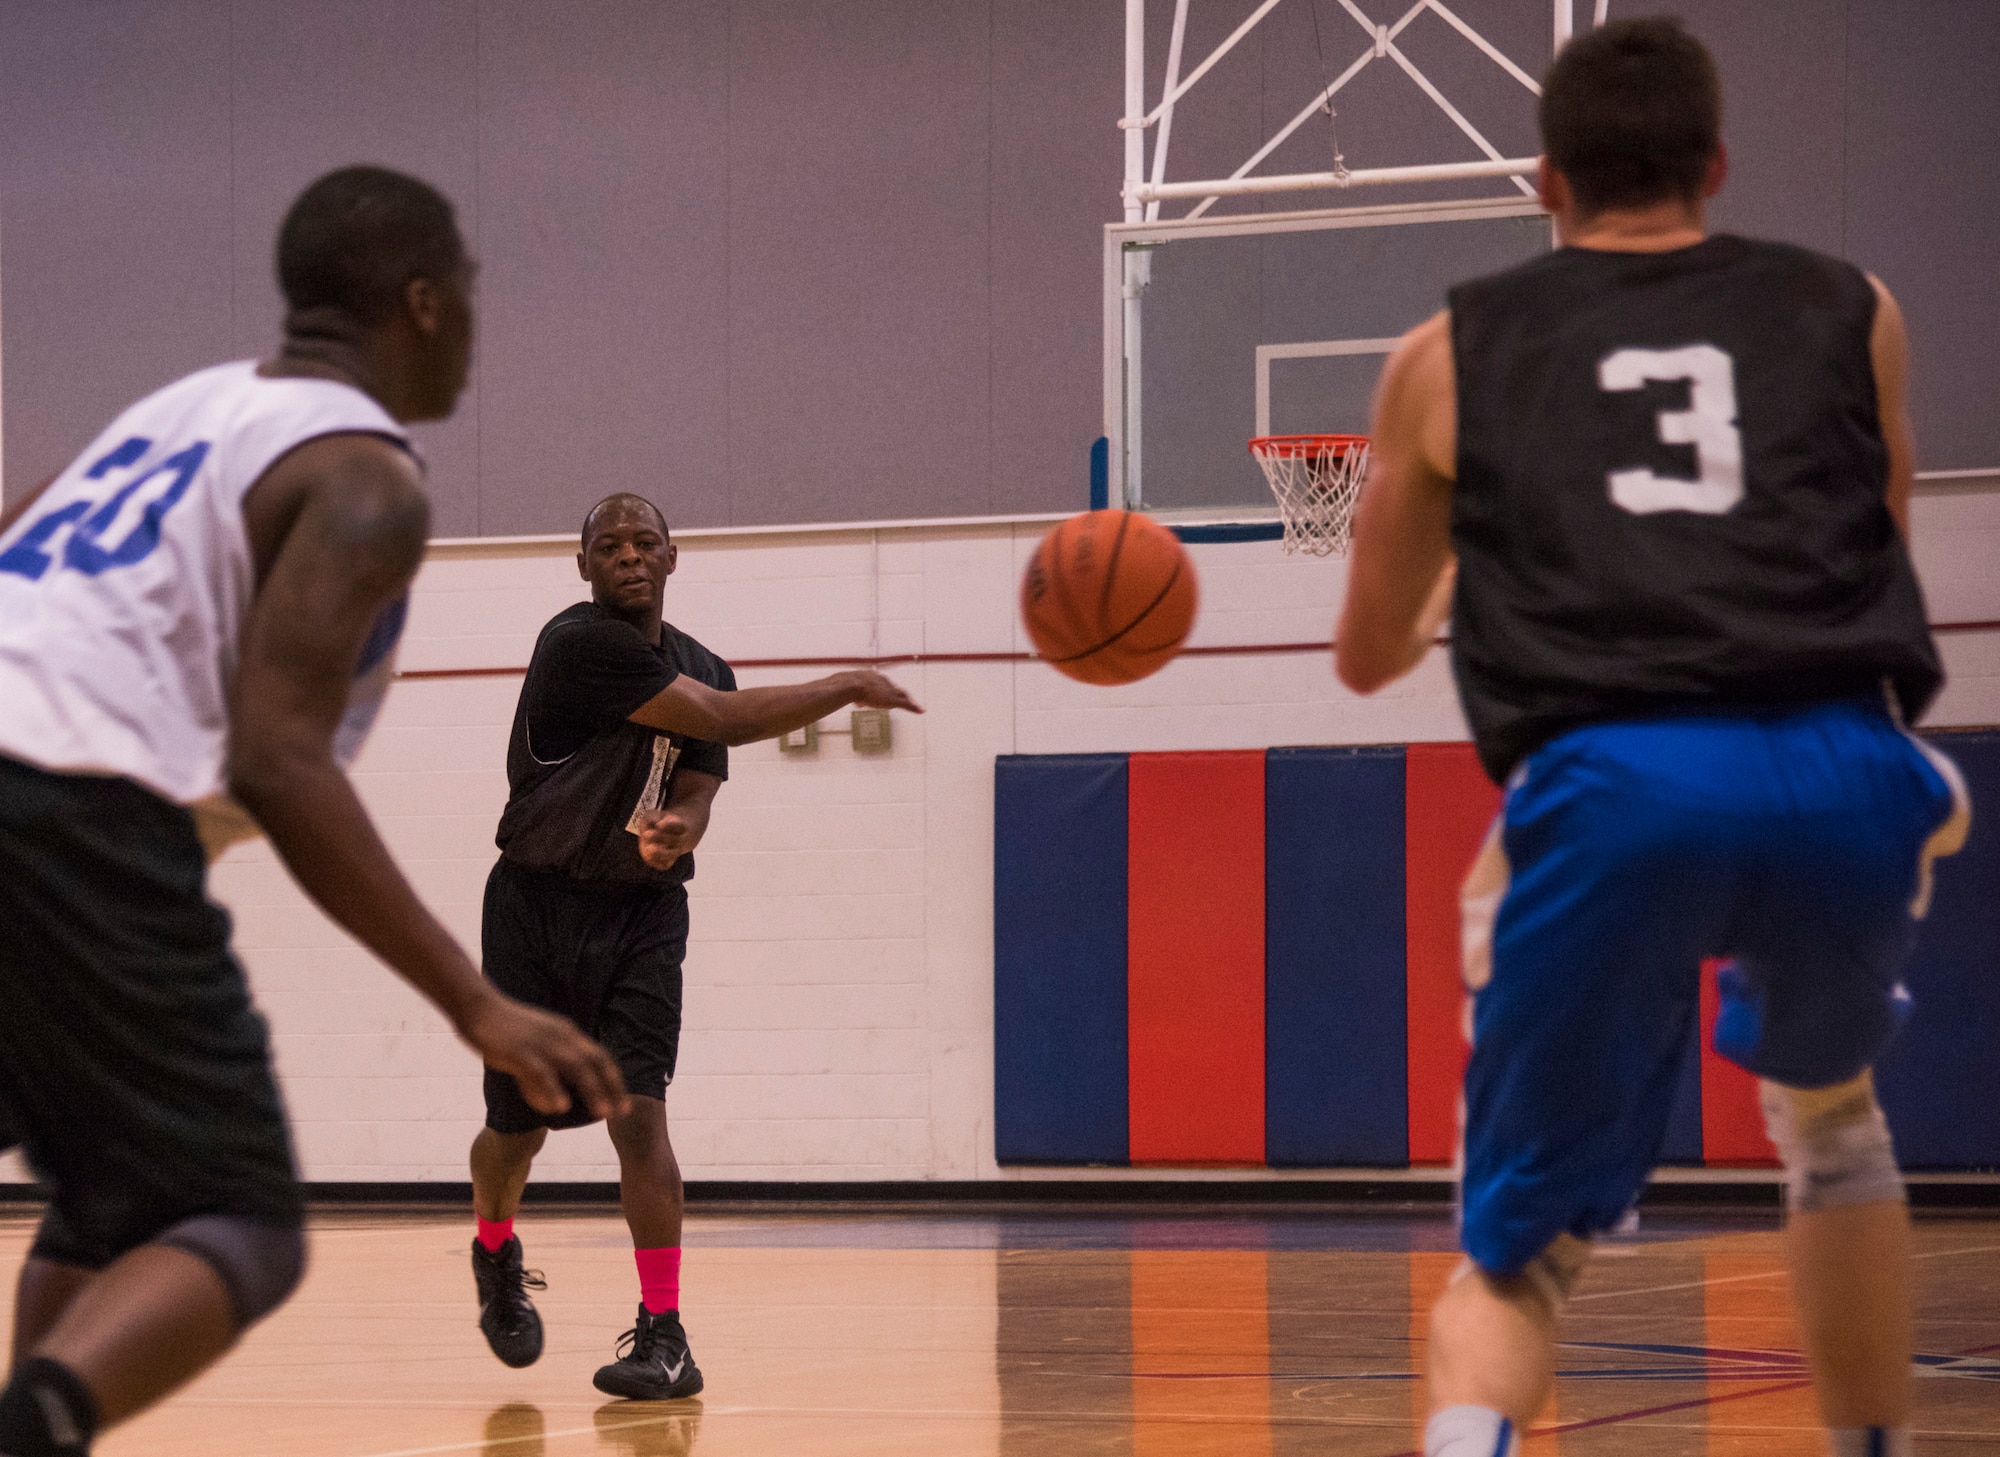 An Armament Directorate competitor passes the ball to David Adler during the intramural basketball championship March 6 at Eglin Air Force Base Fla. The EB team defeated the 53rd Wing team 53-42 to take the trophy. (U.S. Air Force photo/Ilka Cole) 